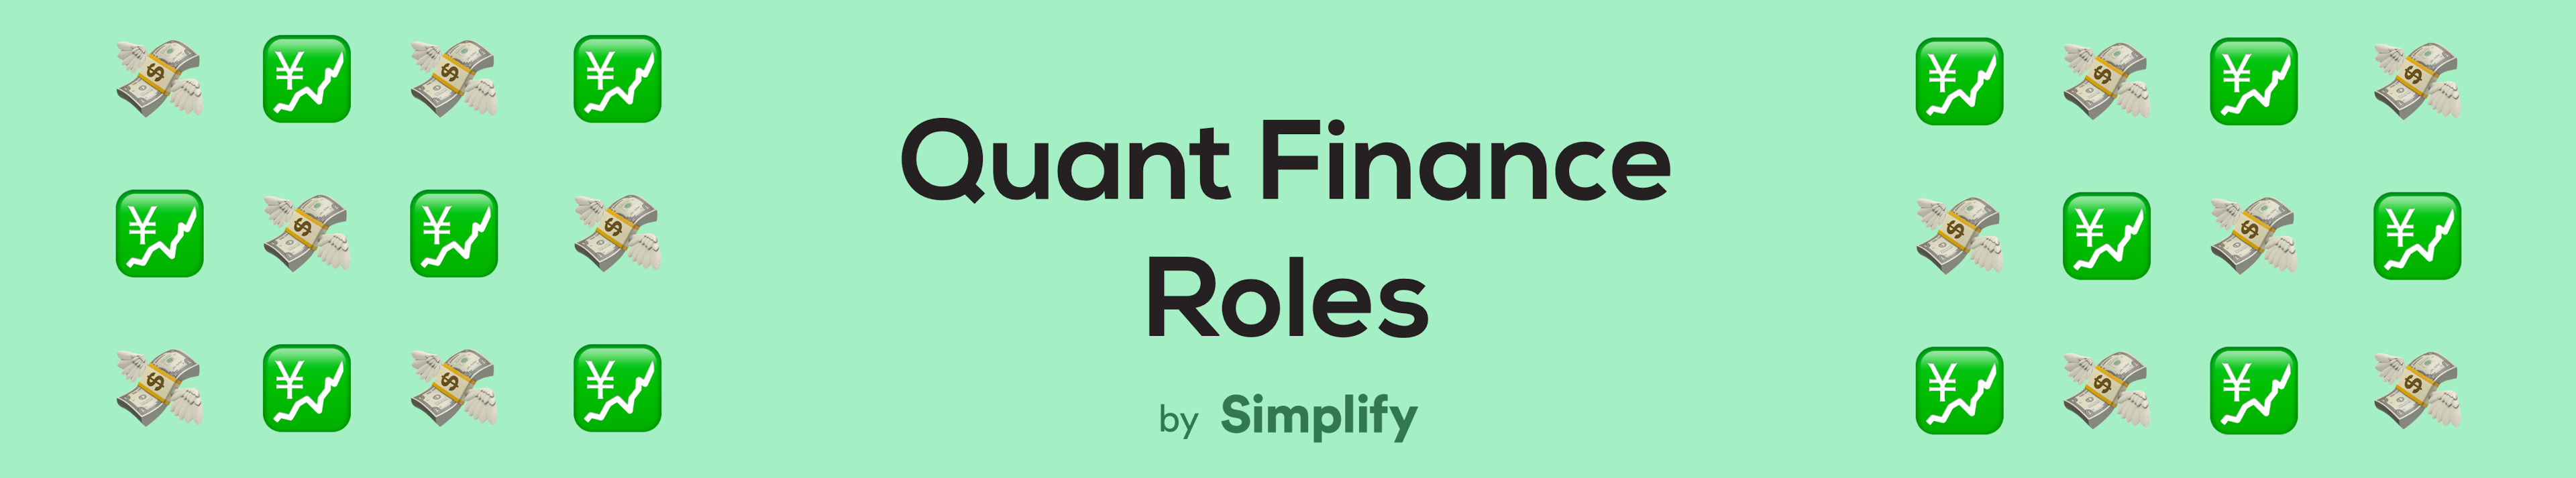 text that says “Quant Finance Roles” surrounded by money and rising graph emojis